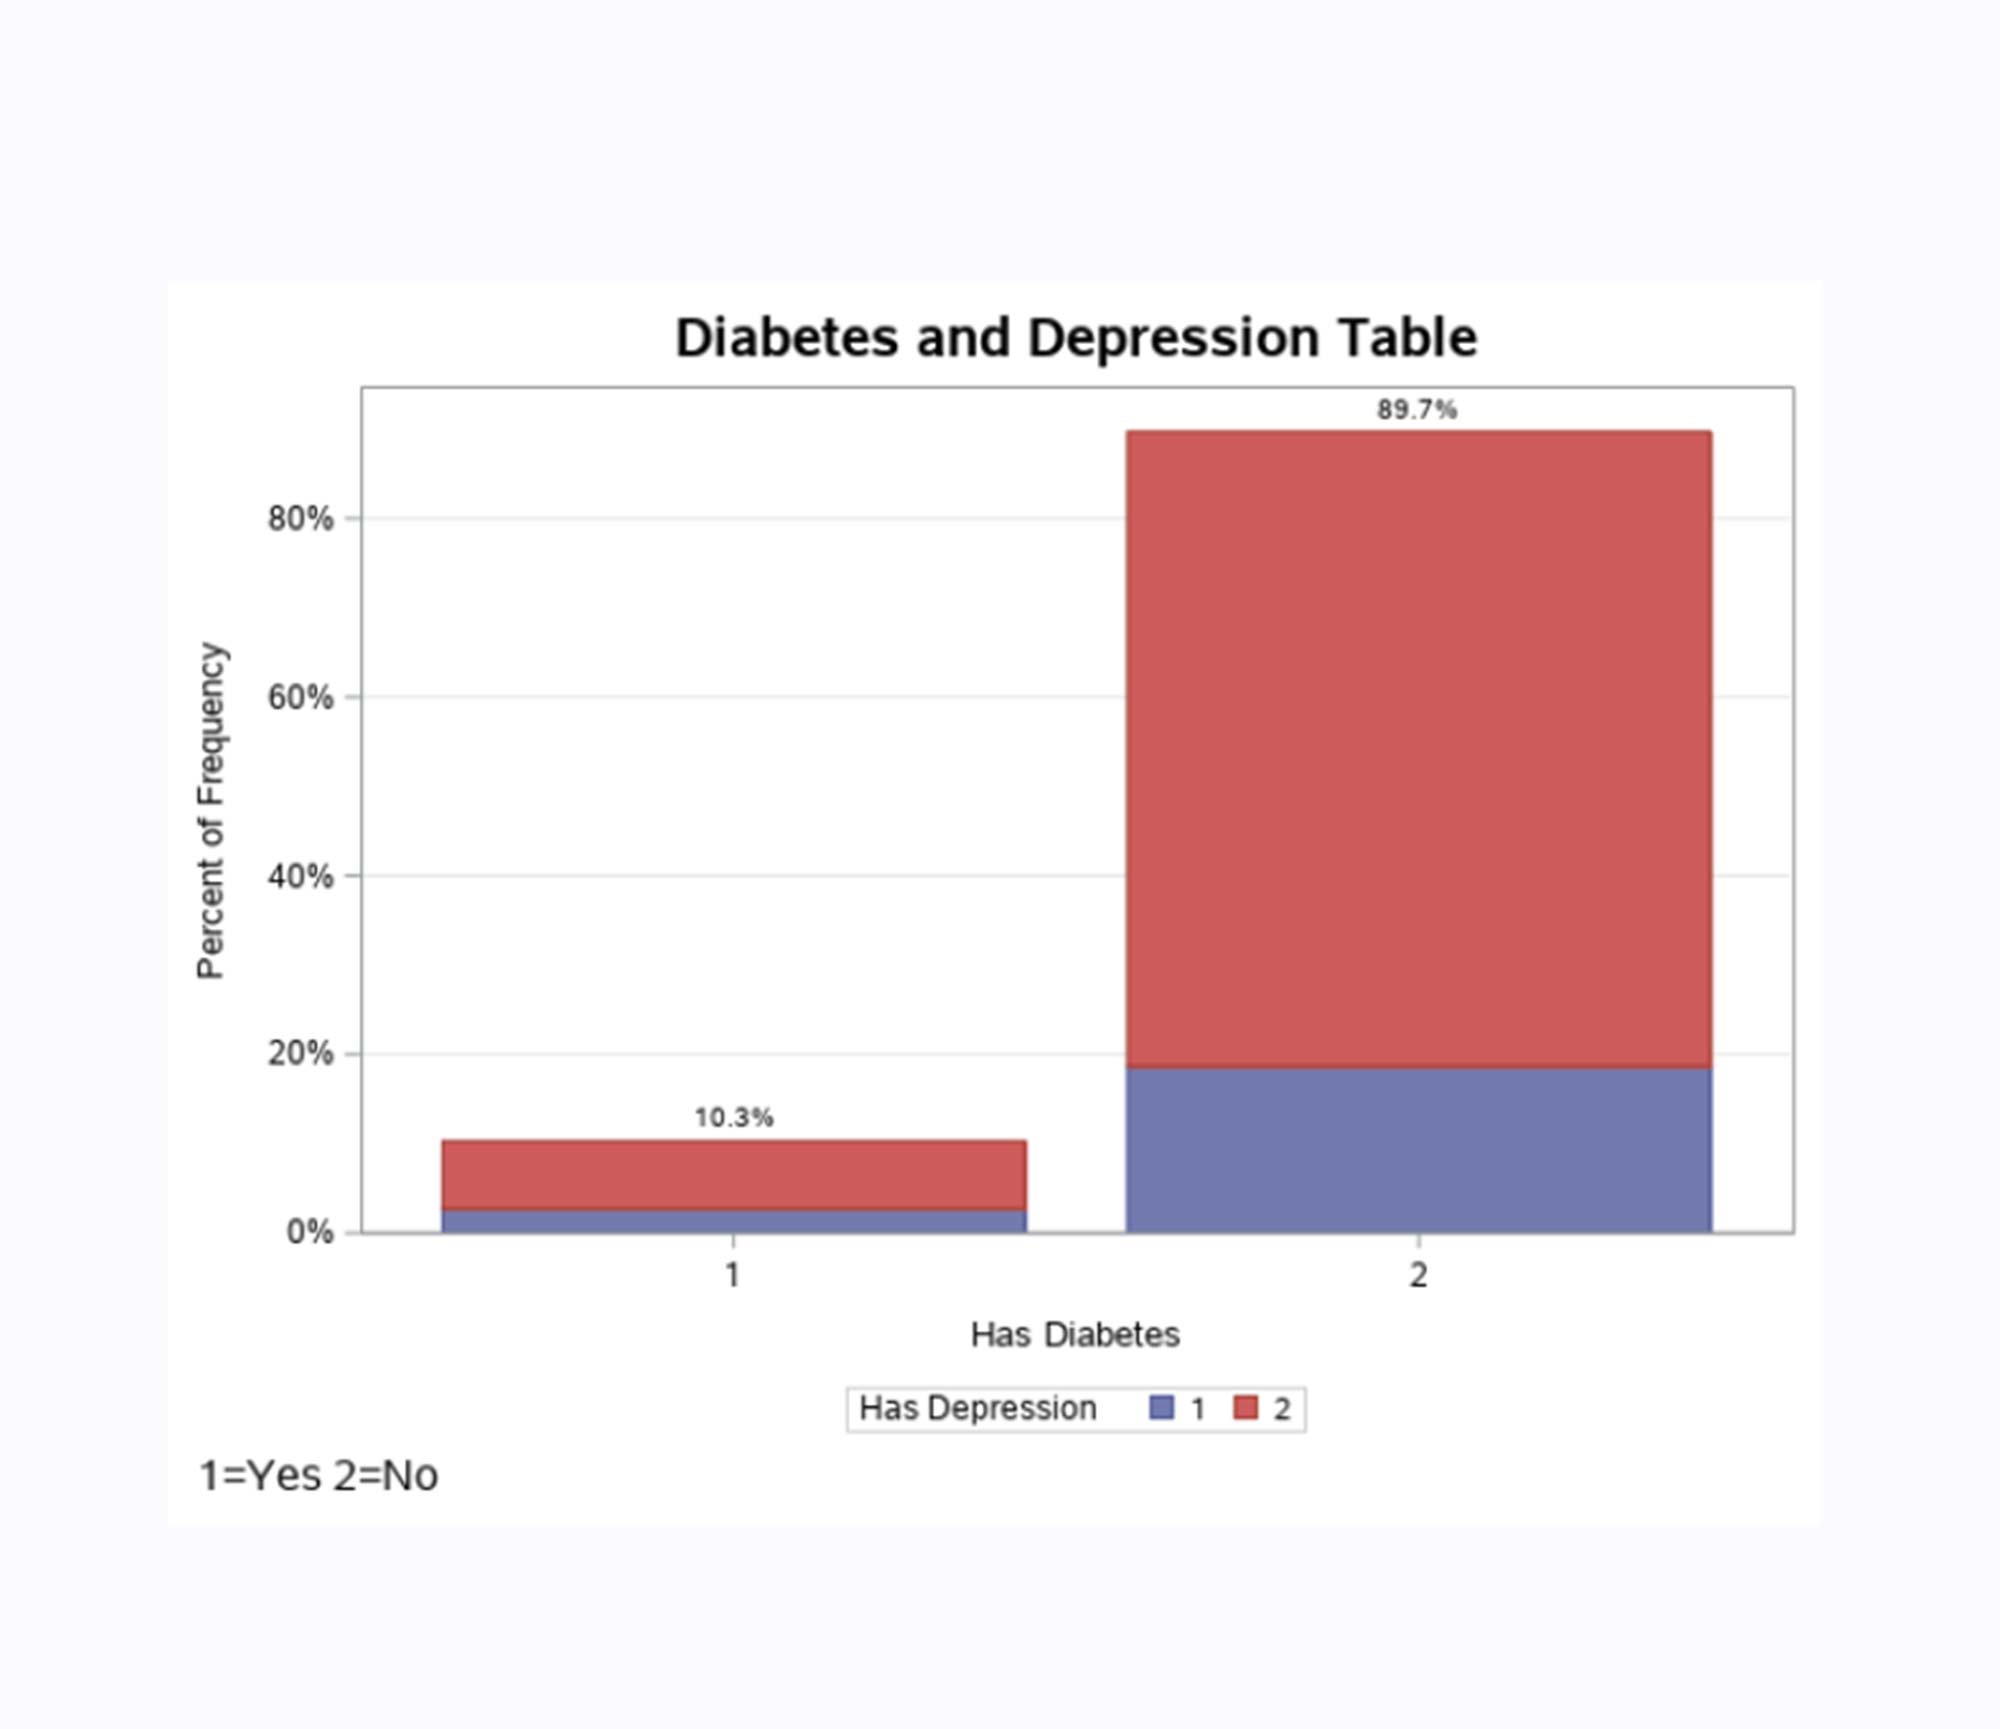 Diabetes and Depression frequency bar graph